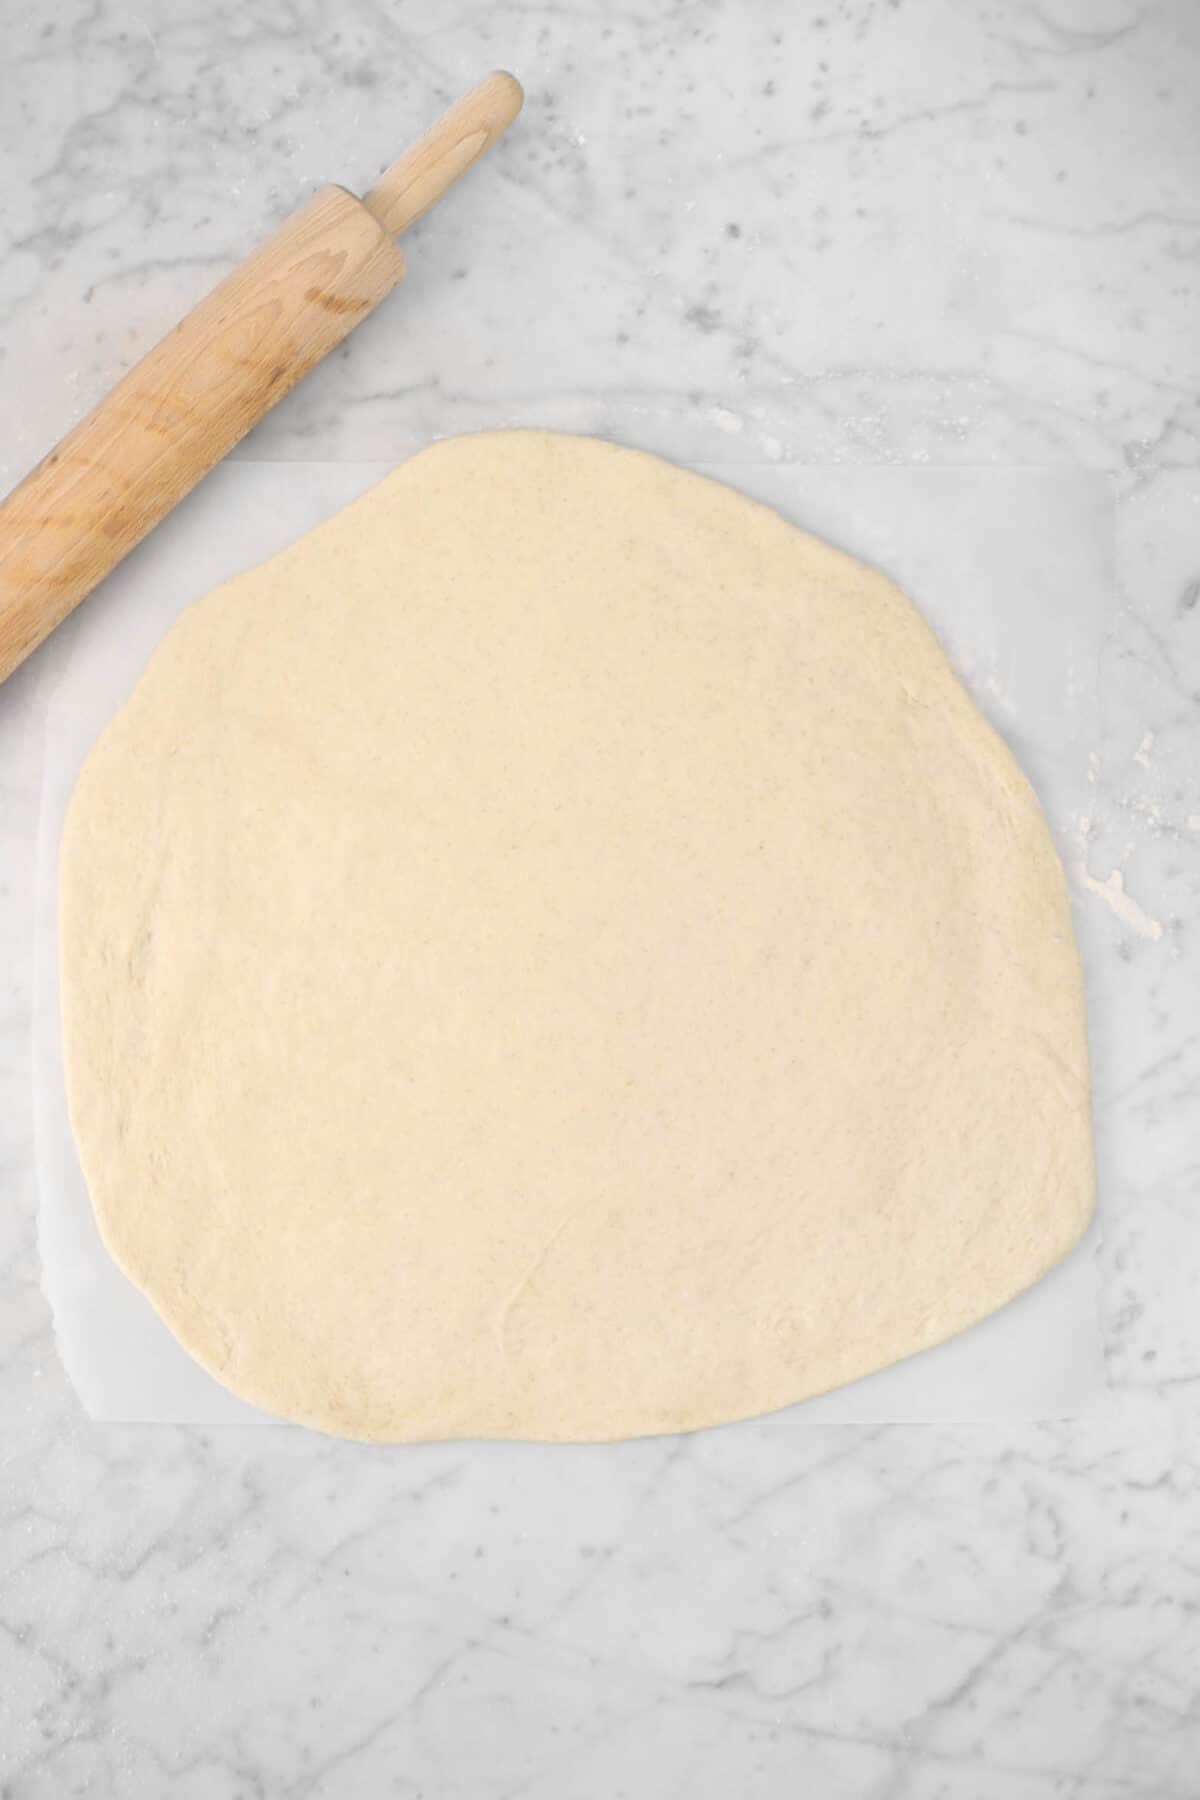 pizza dough rolled out into a circle on a piece of parchment with a wood rolling pin